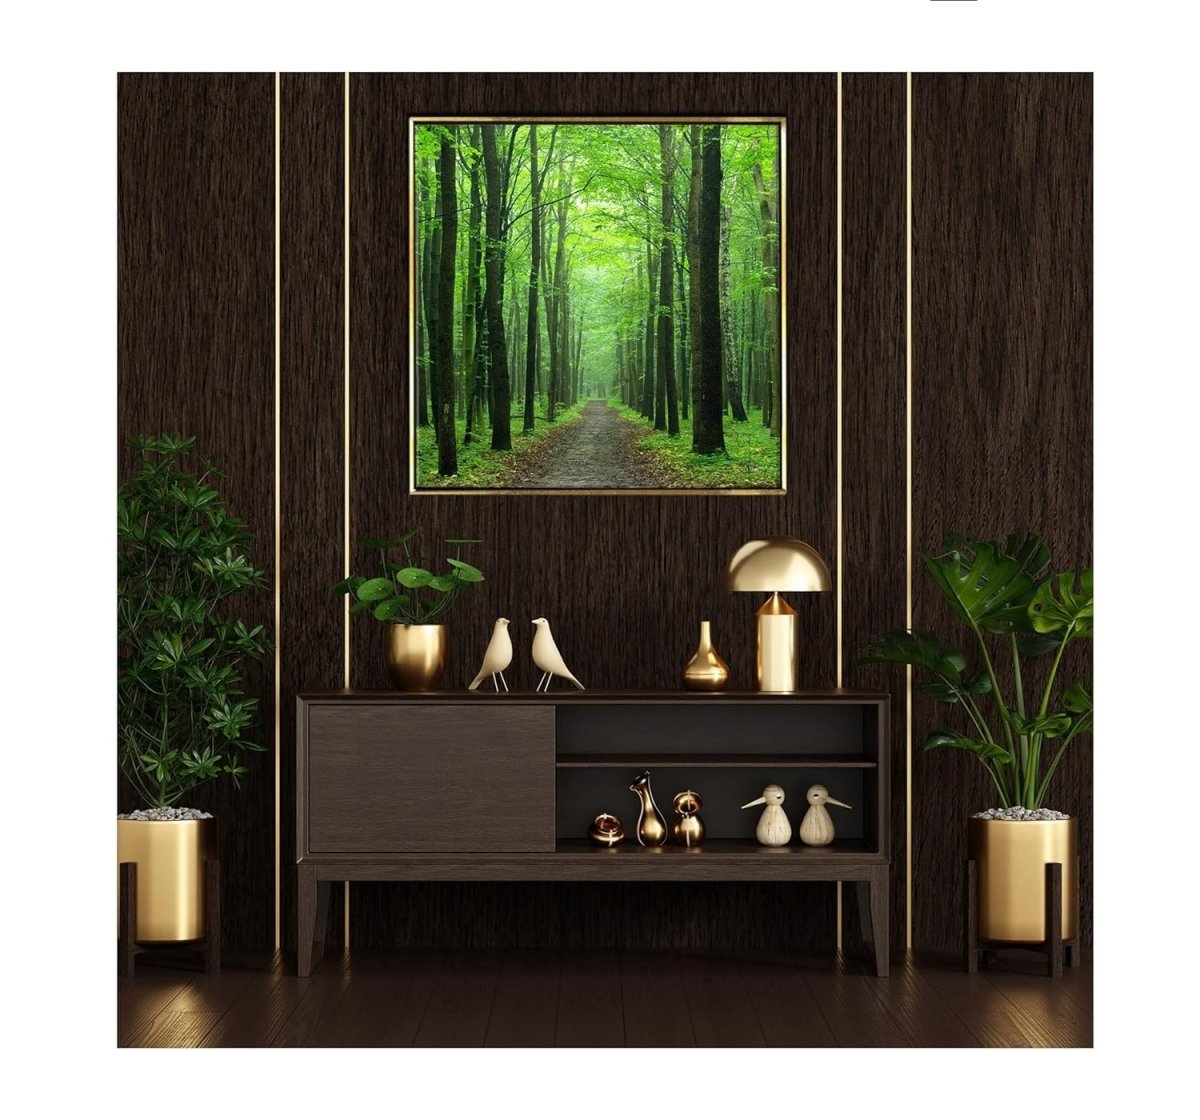 The Forest Trail Framed Canvas Wall Art (24 x 24 Inches)